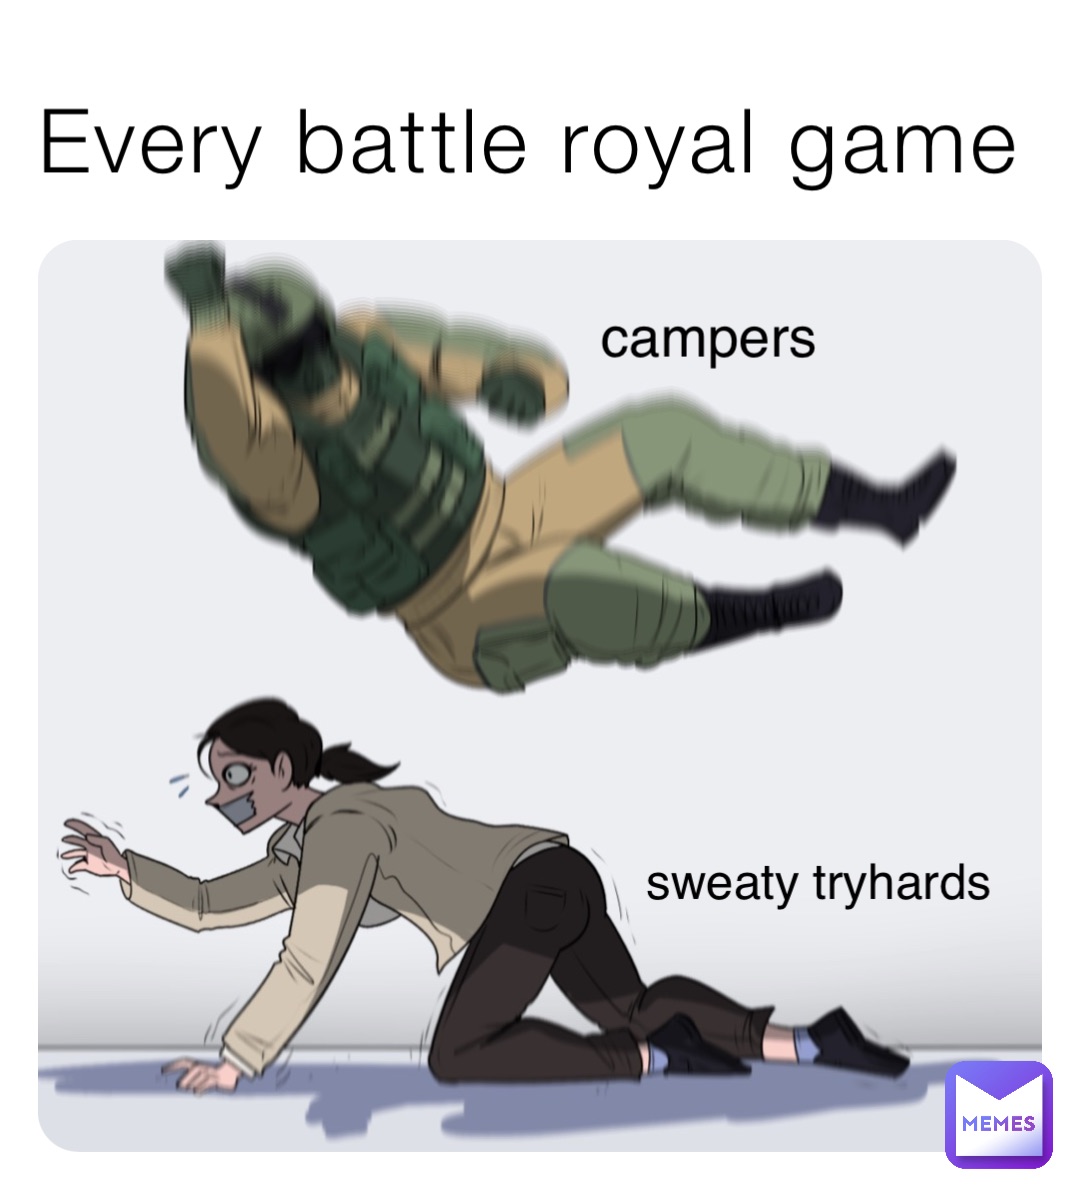 Every battle royal game campers sweaty tryhards